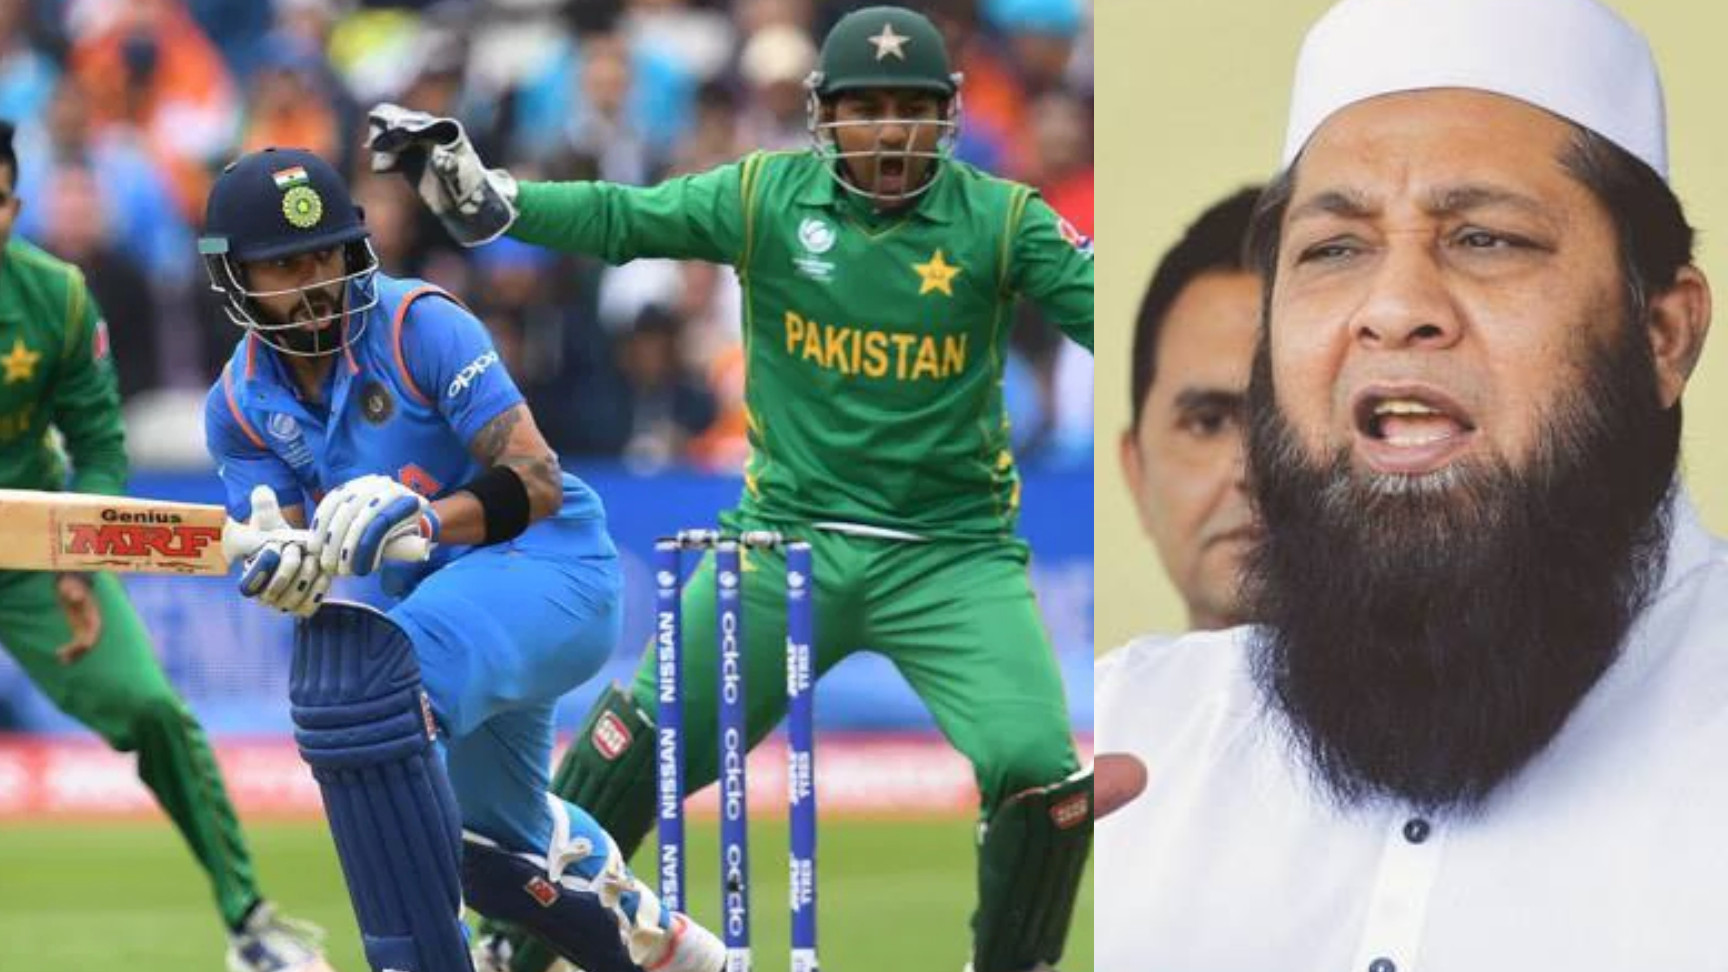 India-Pakistan matches more followed than the Ashes: Inzamam-Ul-Haq calls for resumption of ties